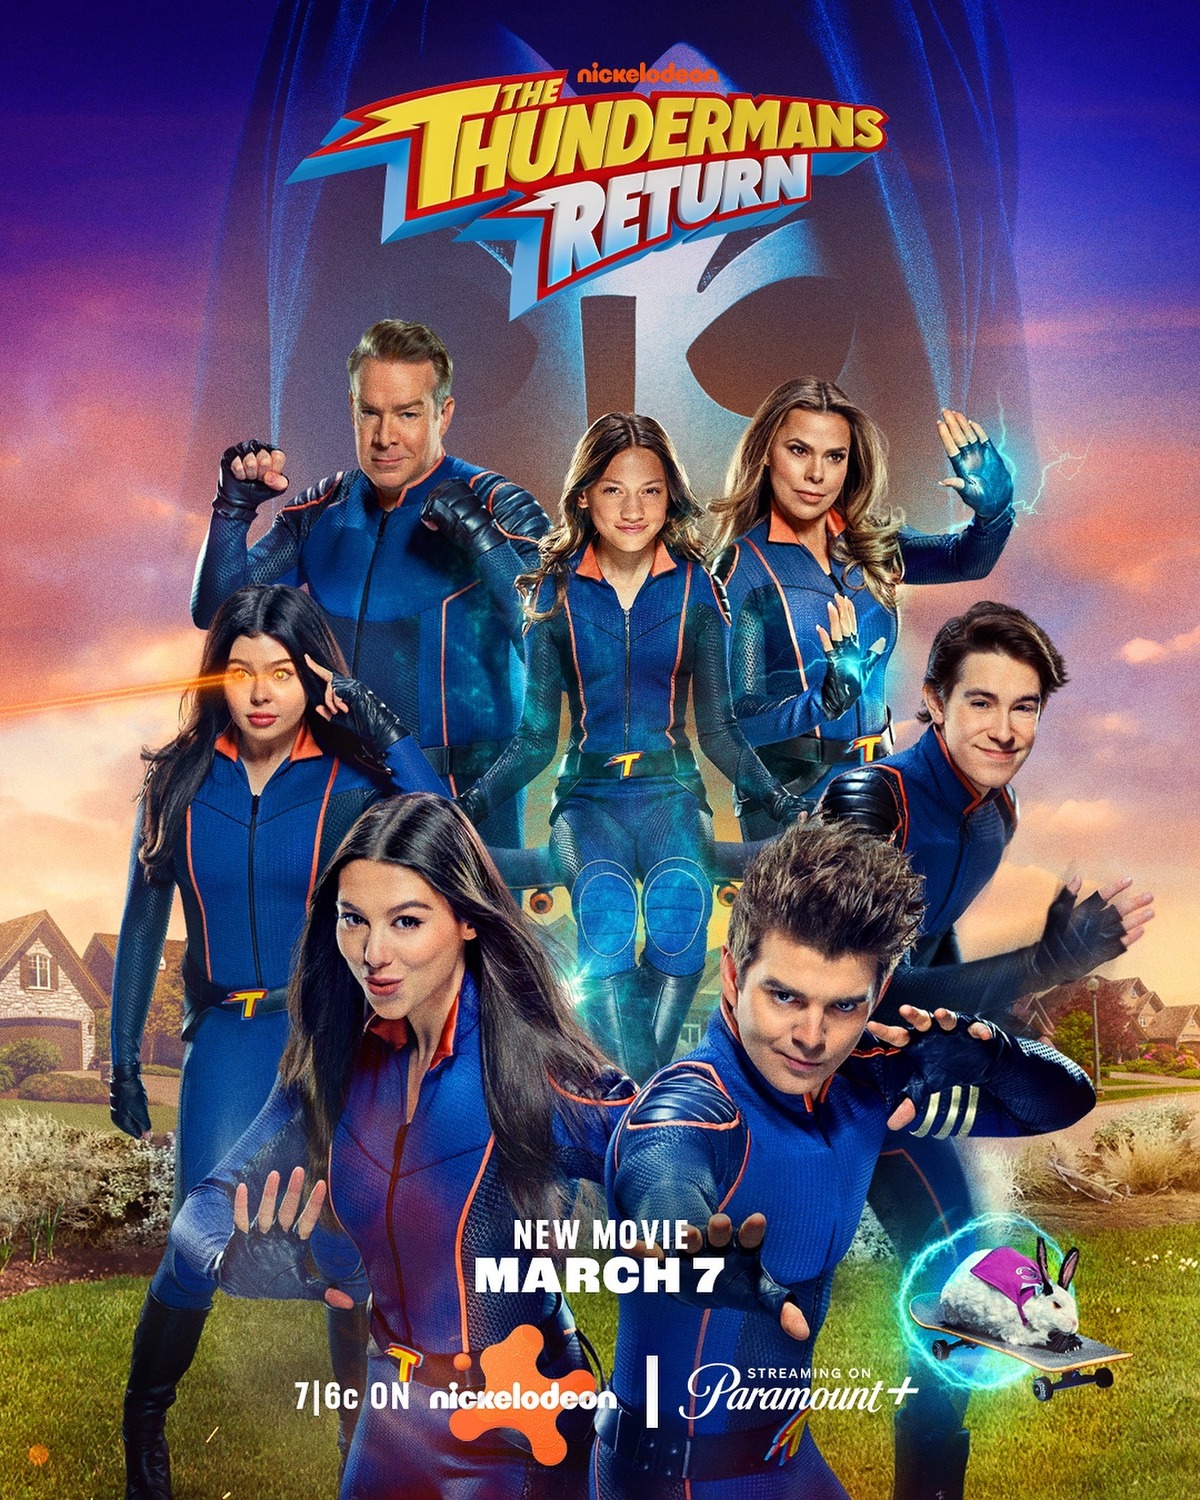 Extra Large Movie Poster Image for The Thundermans Return (#2 of 2)